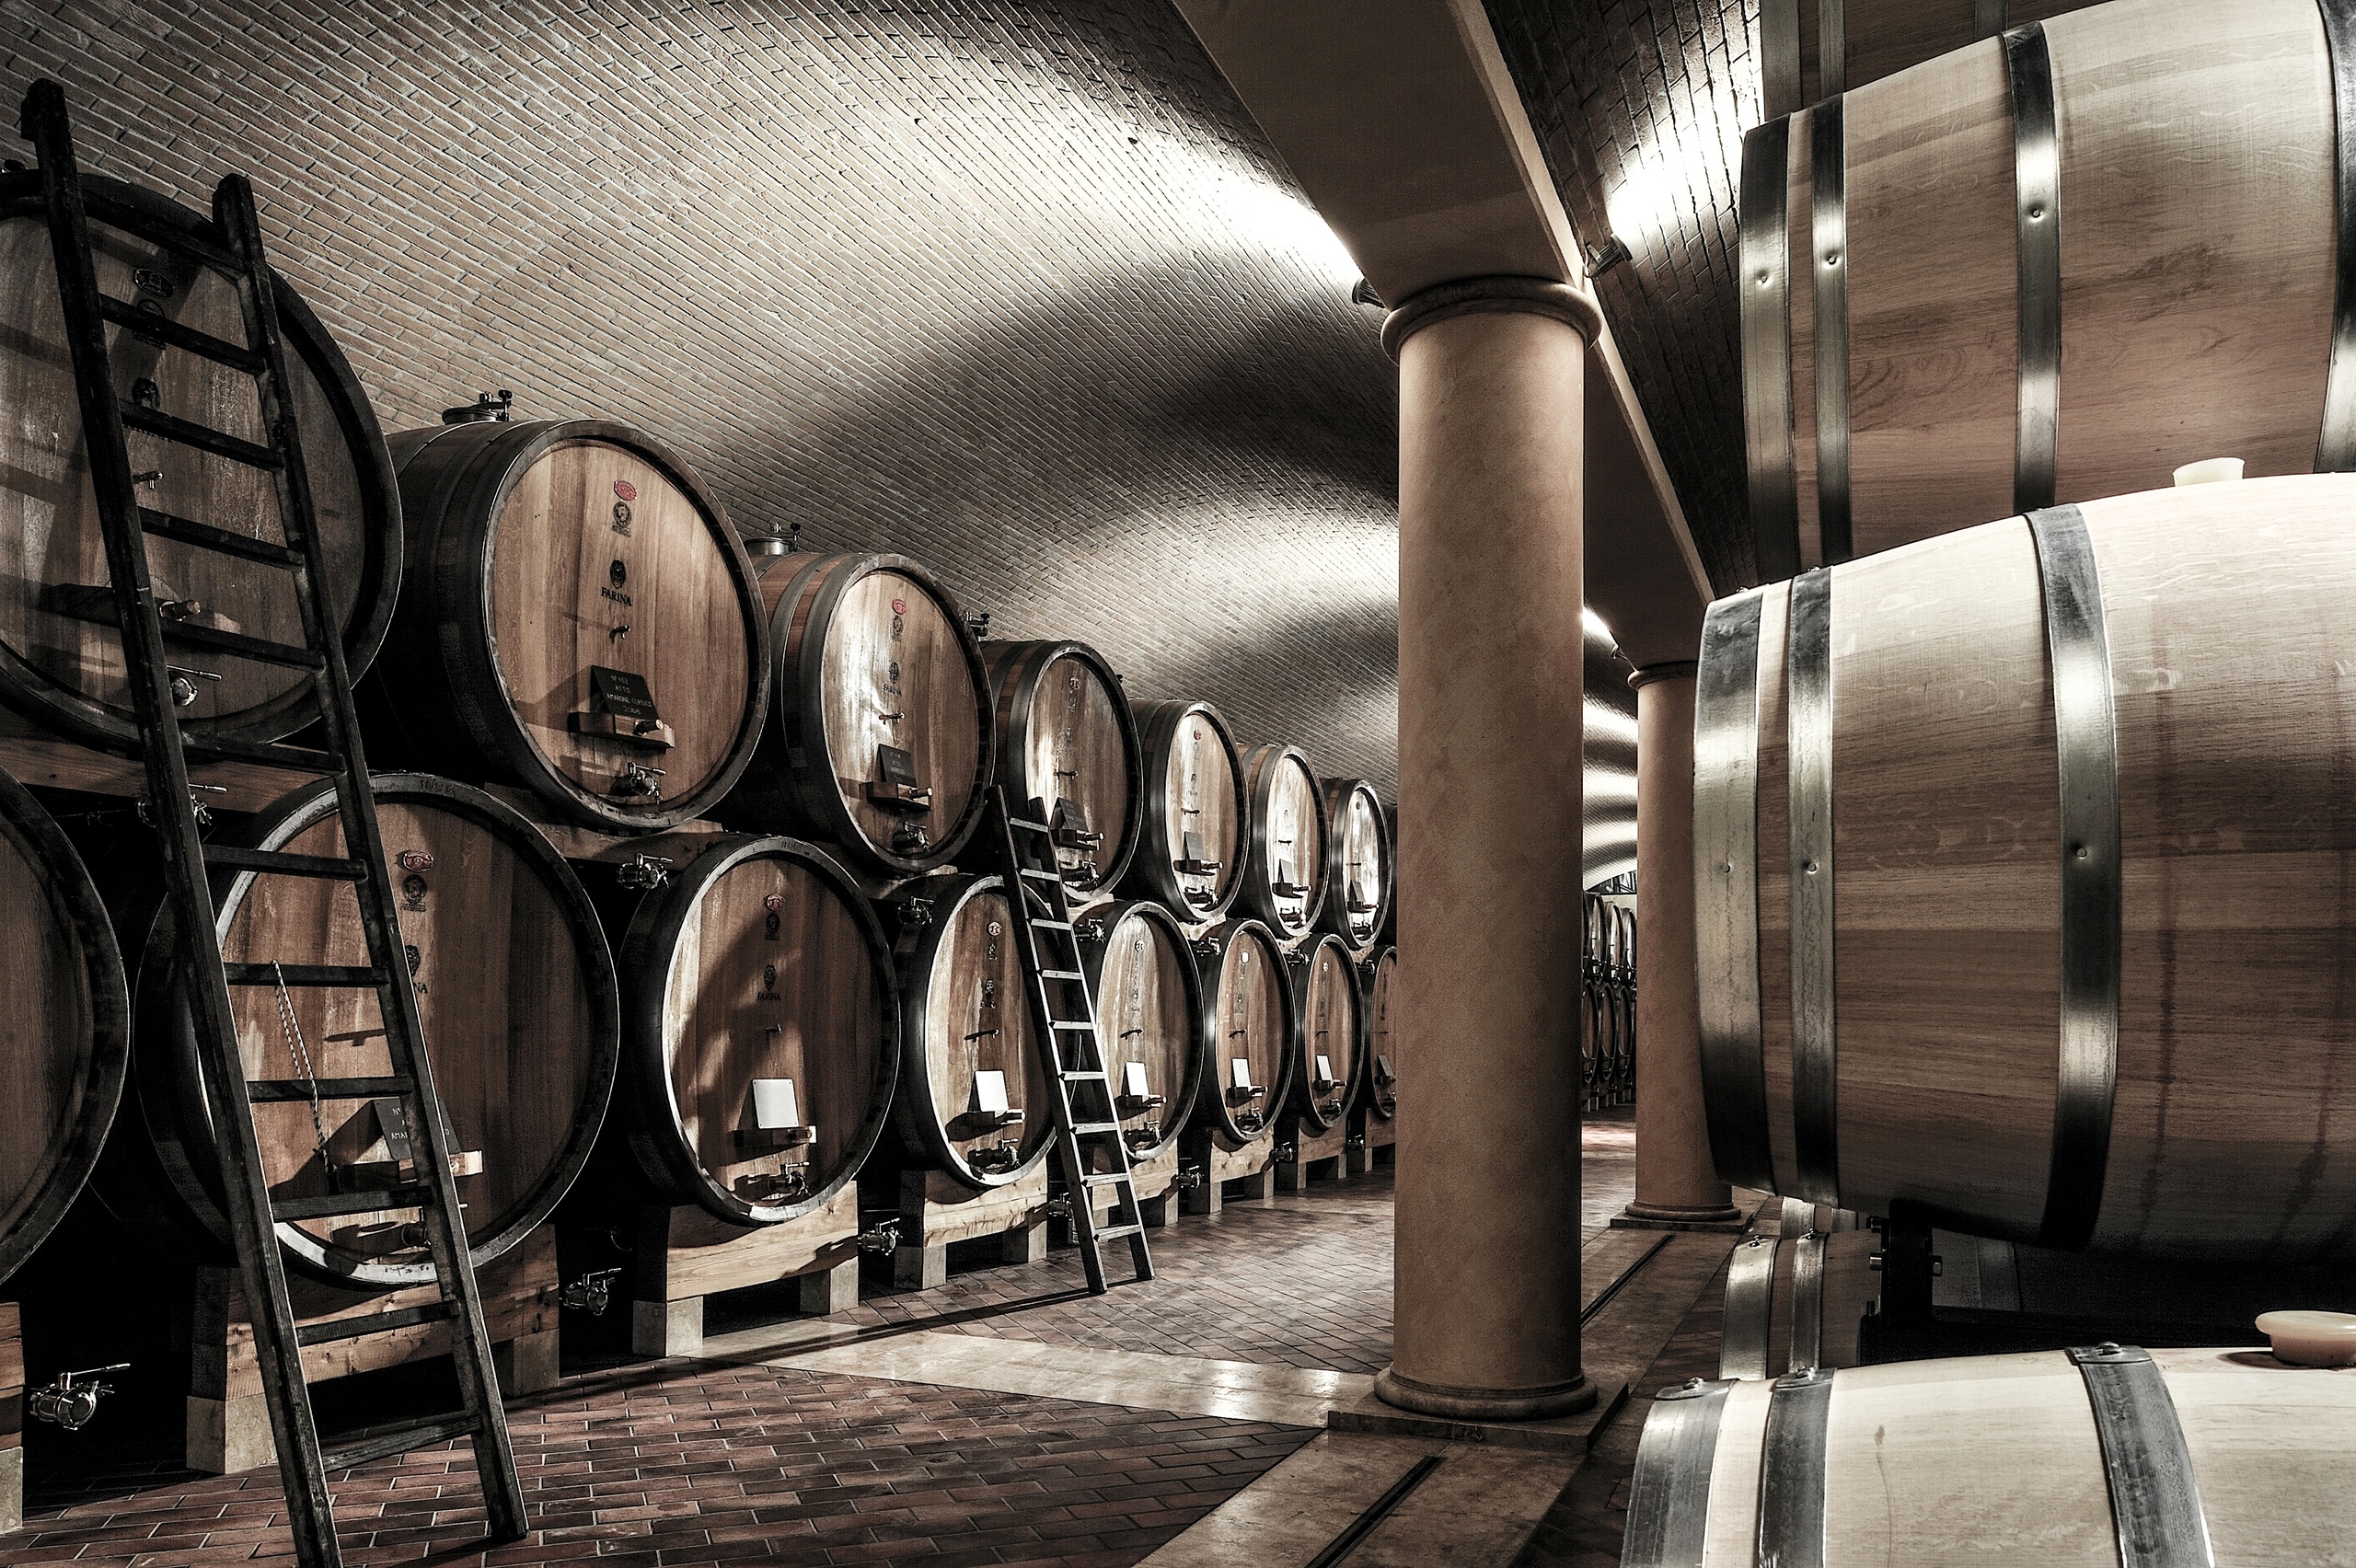 Valpolicella: Guided Tour and Tasting with Lunch in the Cellar in Small Group - Alojamientos en Verona